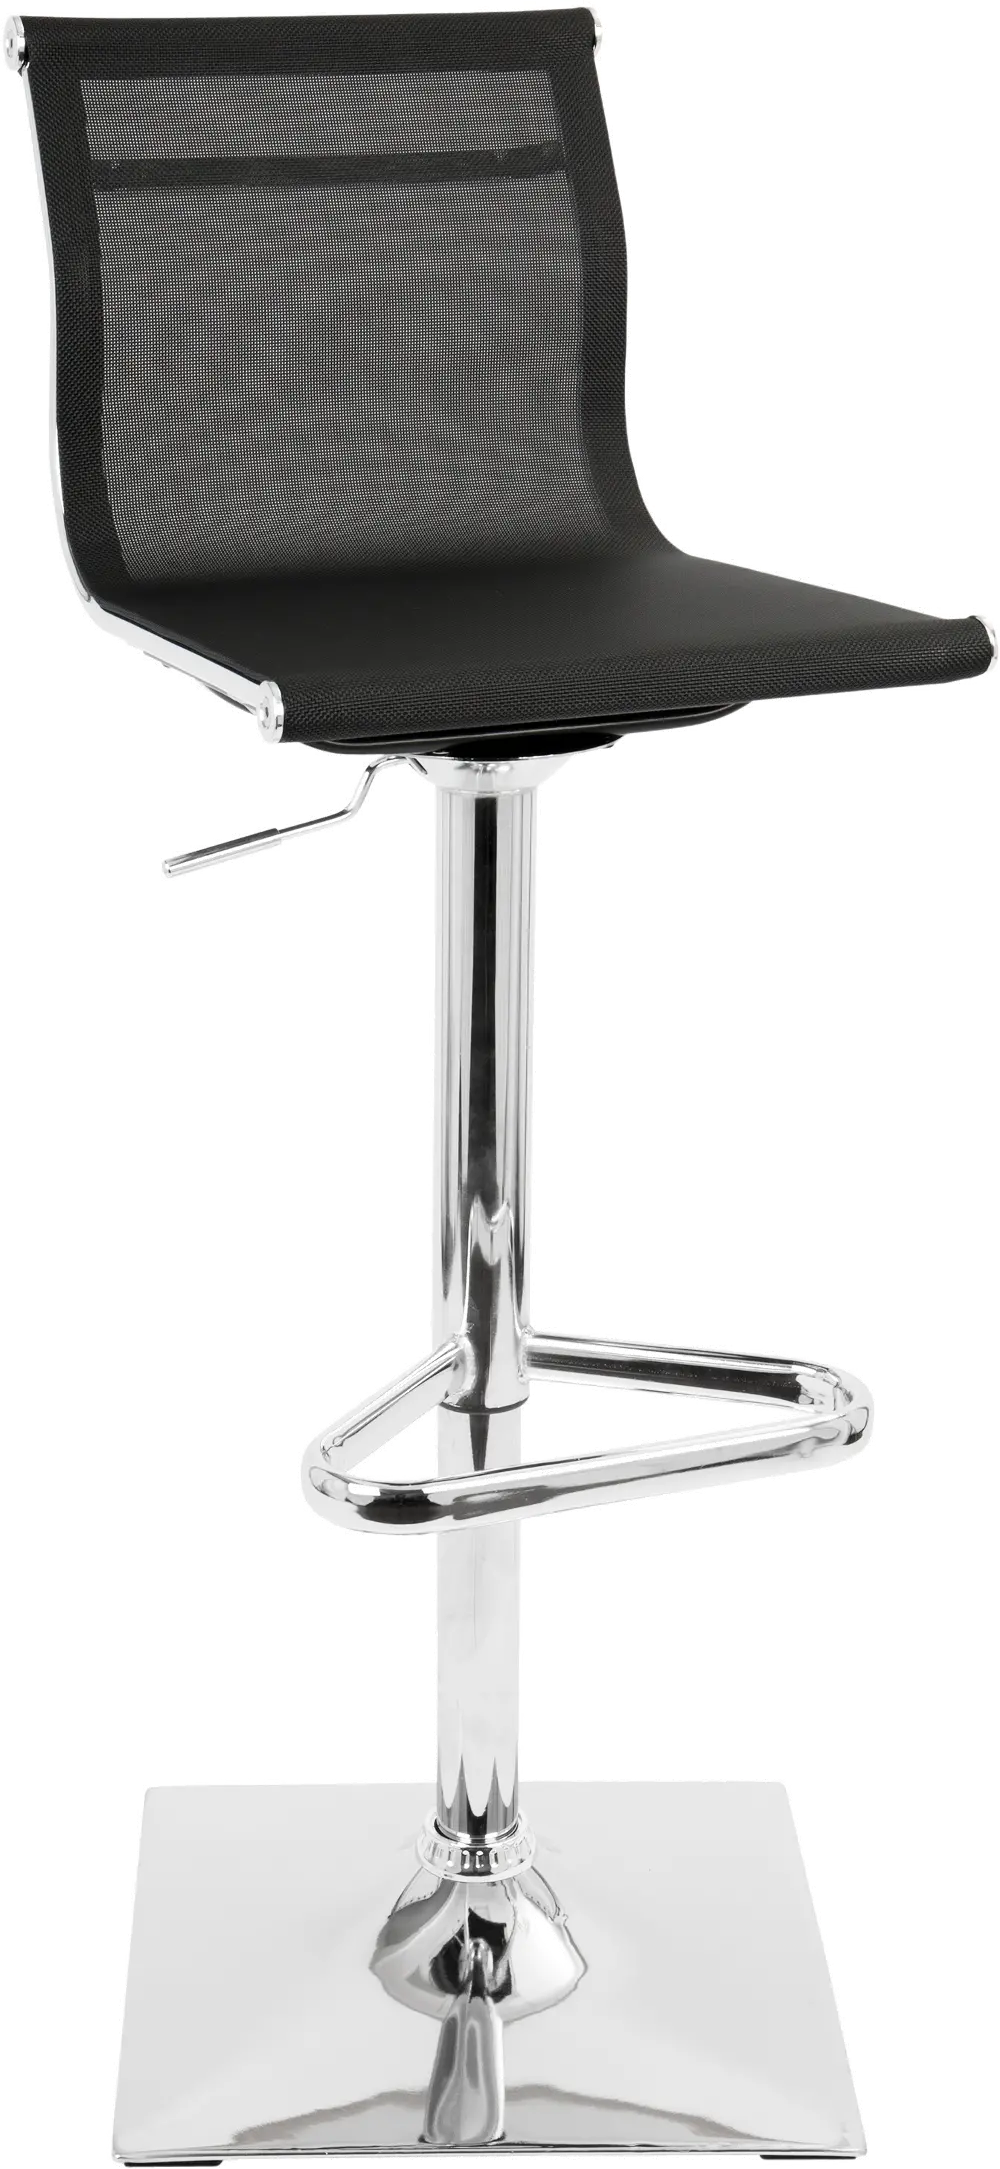 BS-TW-MIRAGE-BK Contemporary Black and Chrome Adjustable Bar Stool - Mirage-1